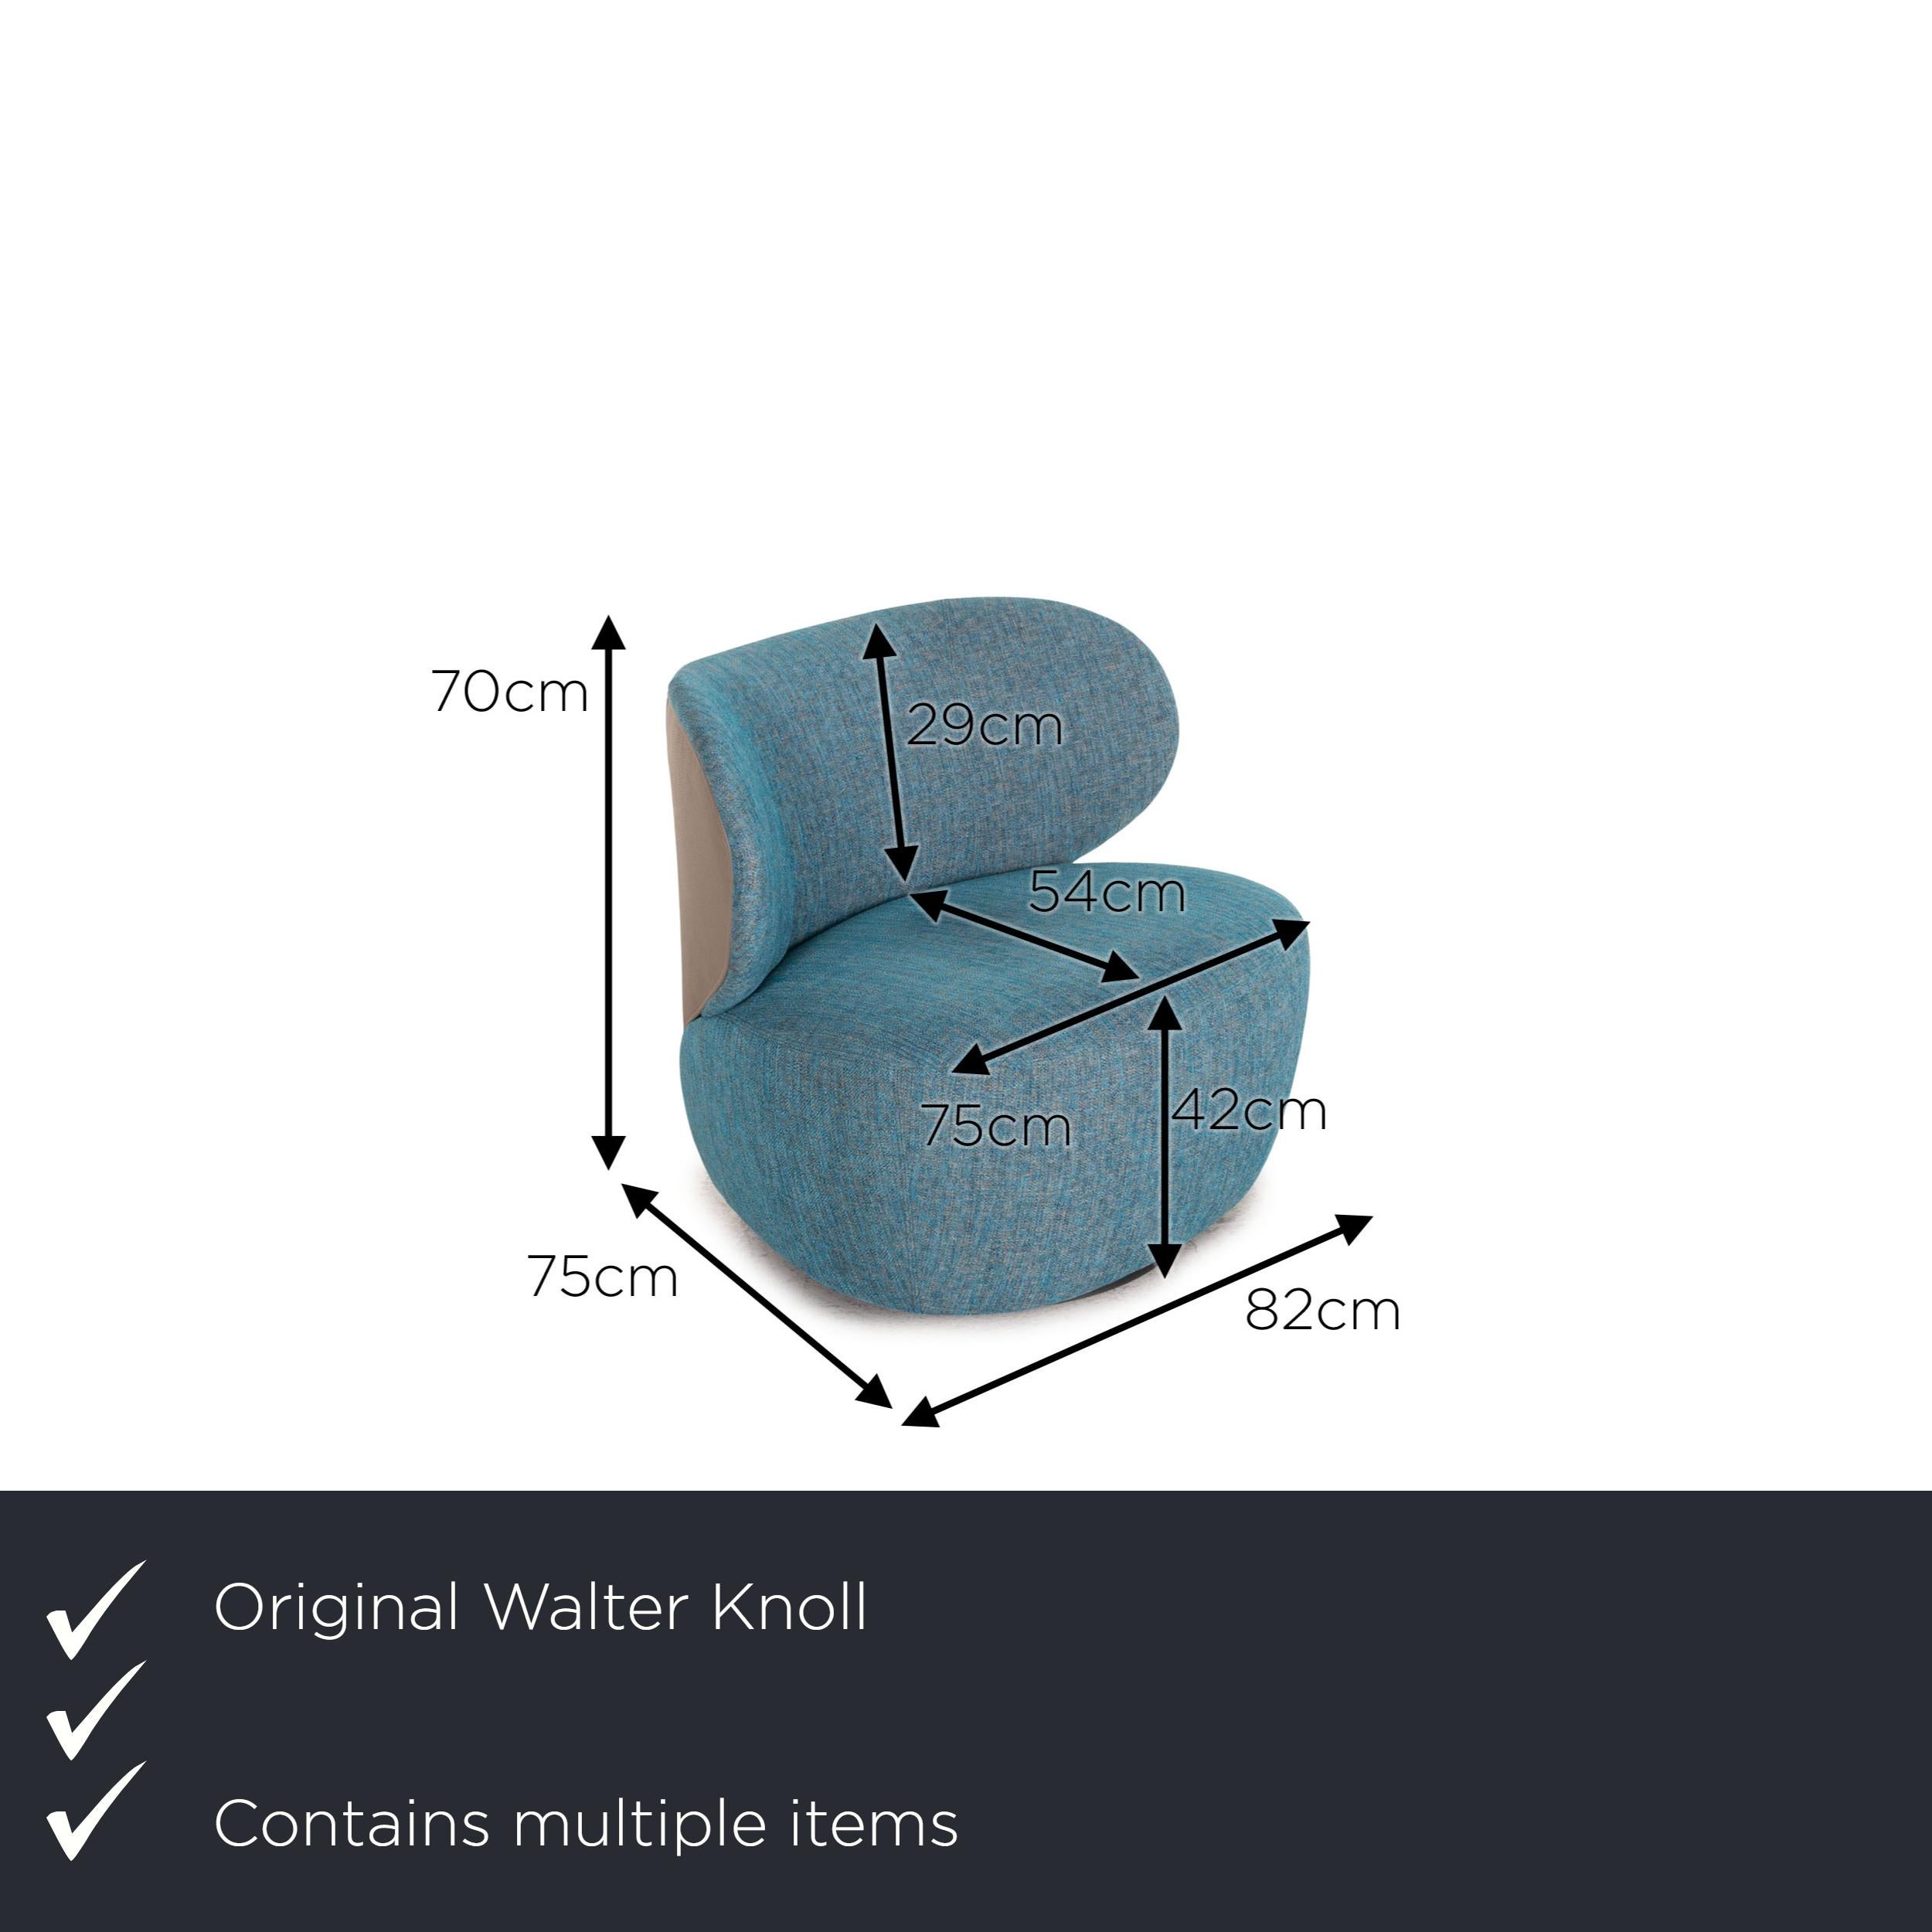 We present to you a Walter Knoll Boa fabric armchair set blue.

Product measurements in centimeters:

depth: 75
width: 82
height: 70
seat height: 42
seat depth: 54
seat width: 75
back height: 29.

 
 